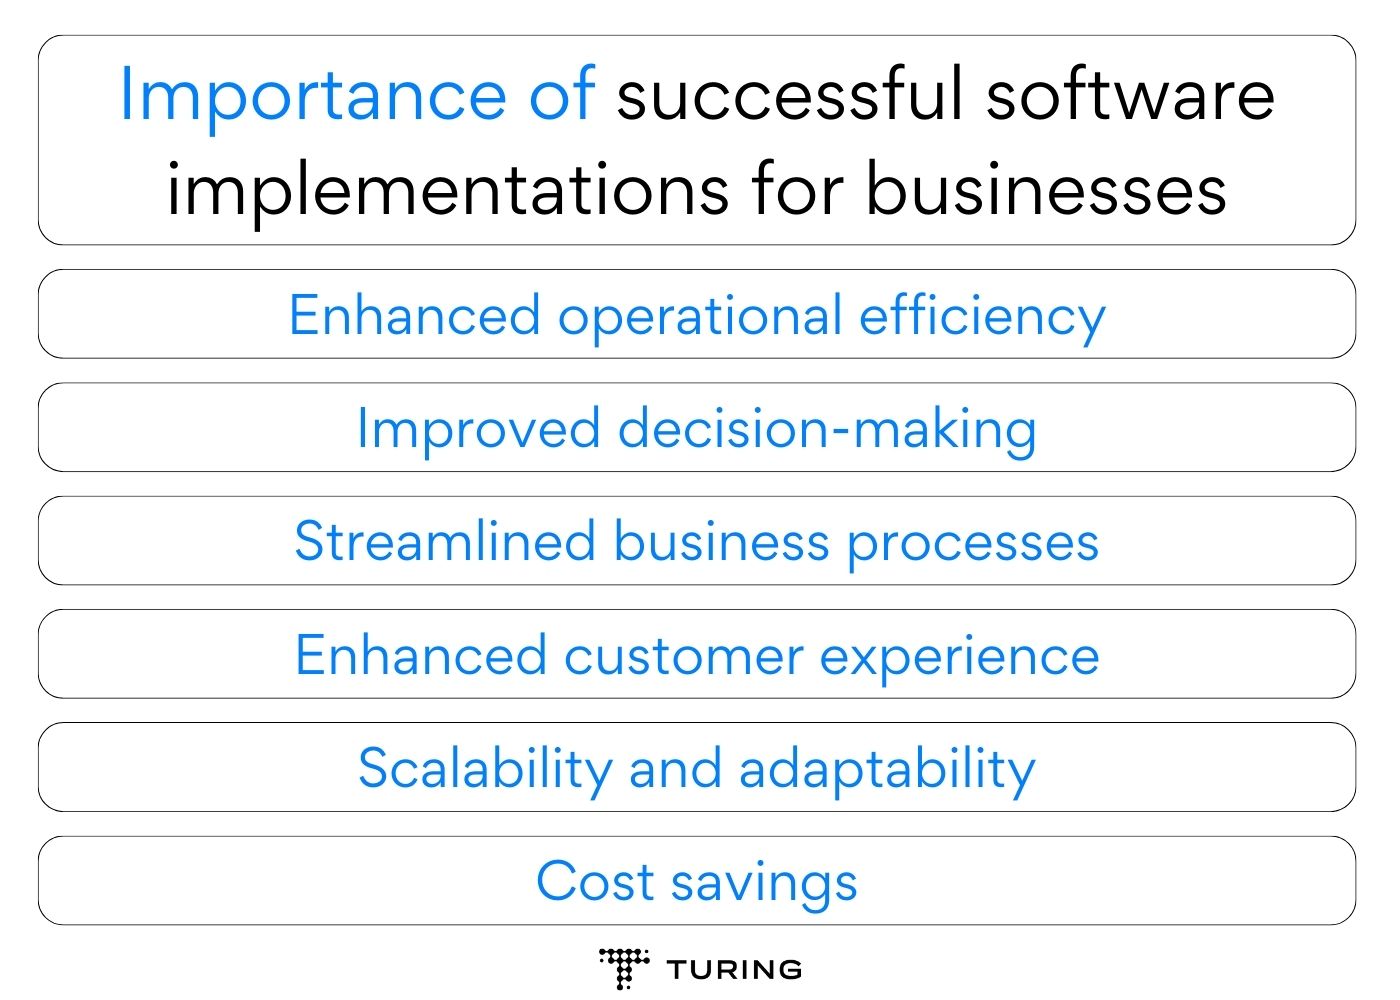 Importance of successful software implementations for businesses